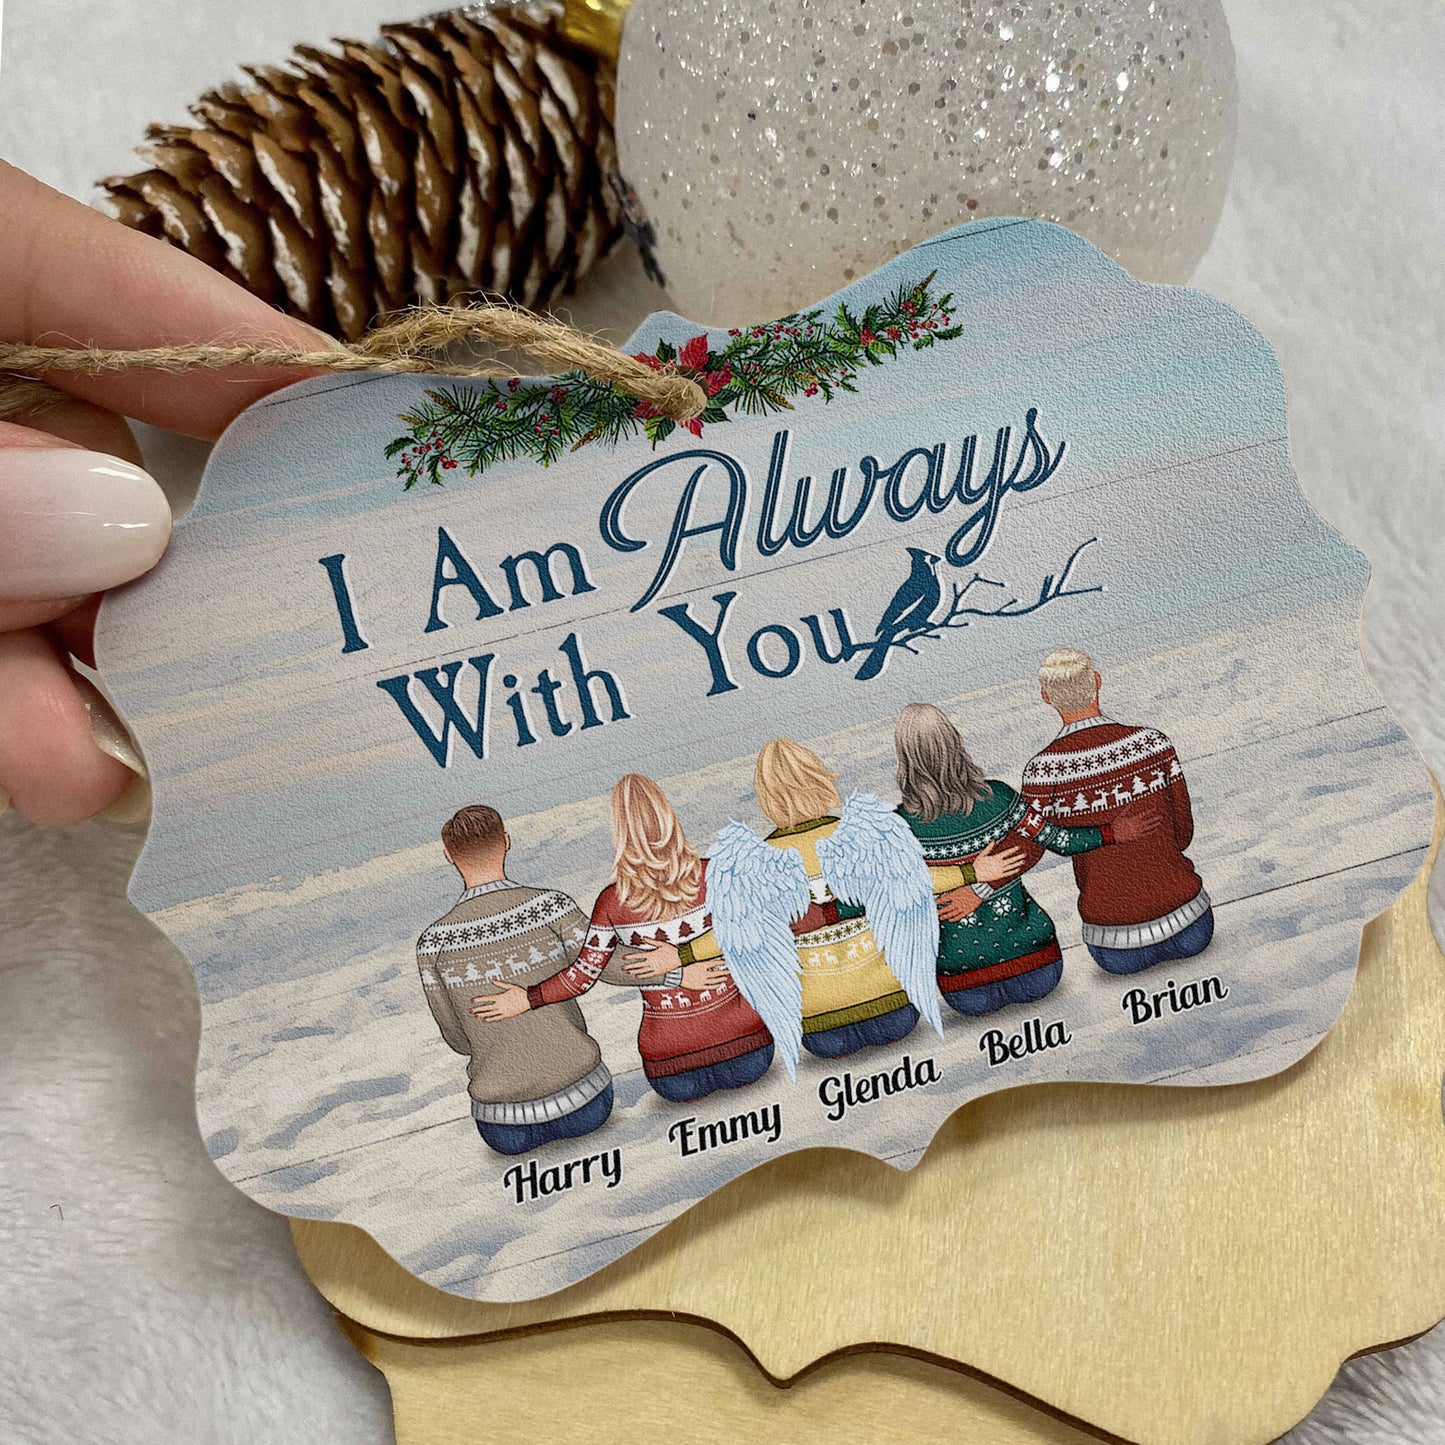 I Am Always With You Heaven - Personalized Aluminum/Wooden Ornament